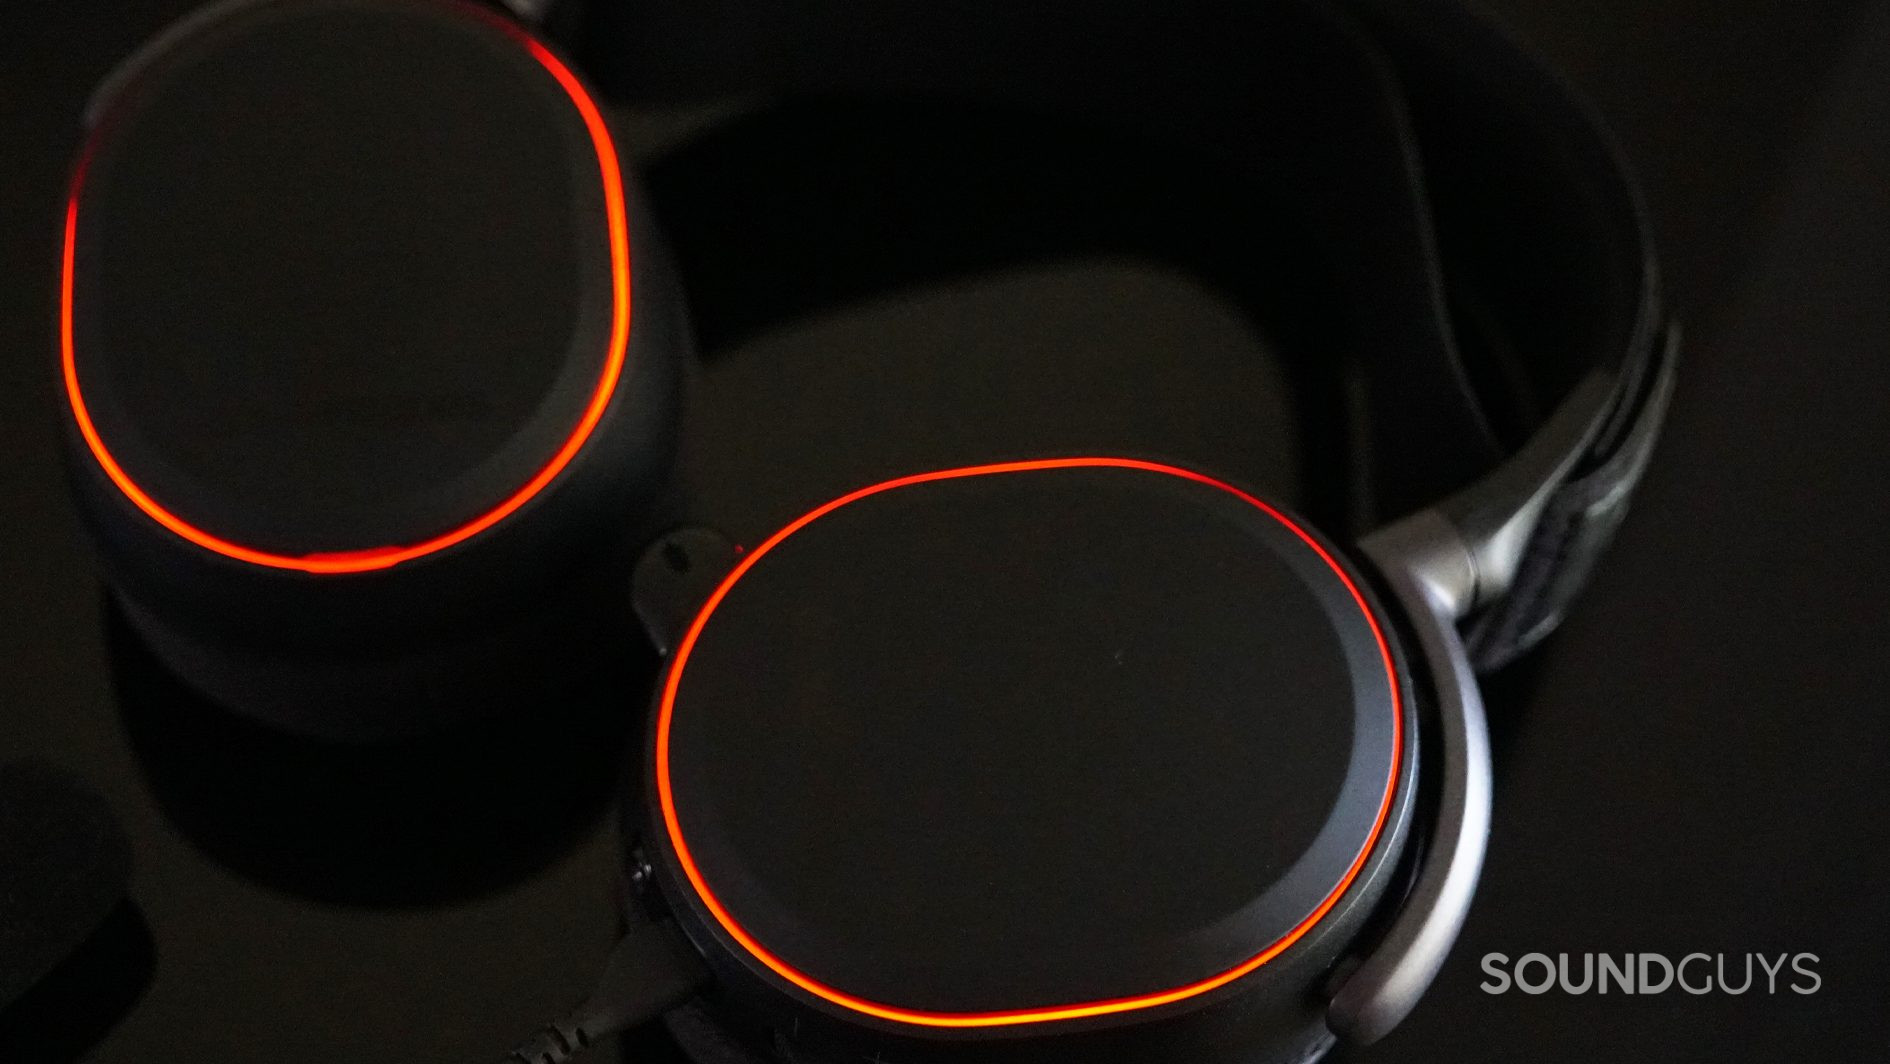 The Arctis Pro lays flat on a black reflective surface with its LED lights glowing orange.